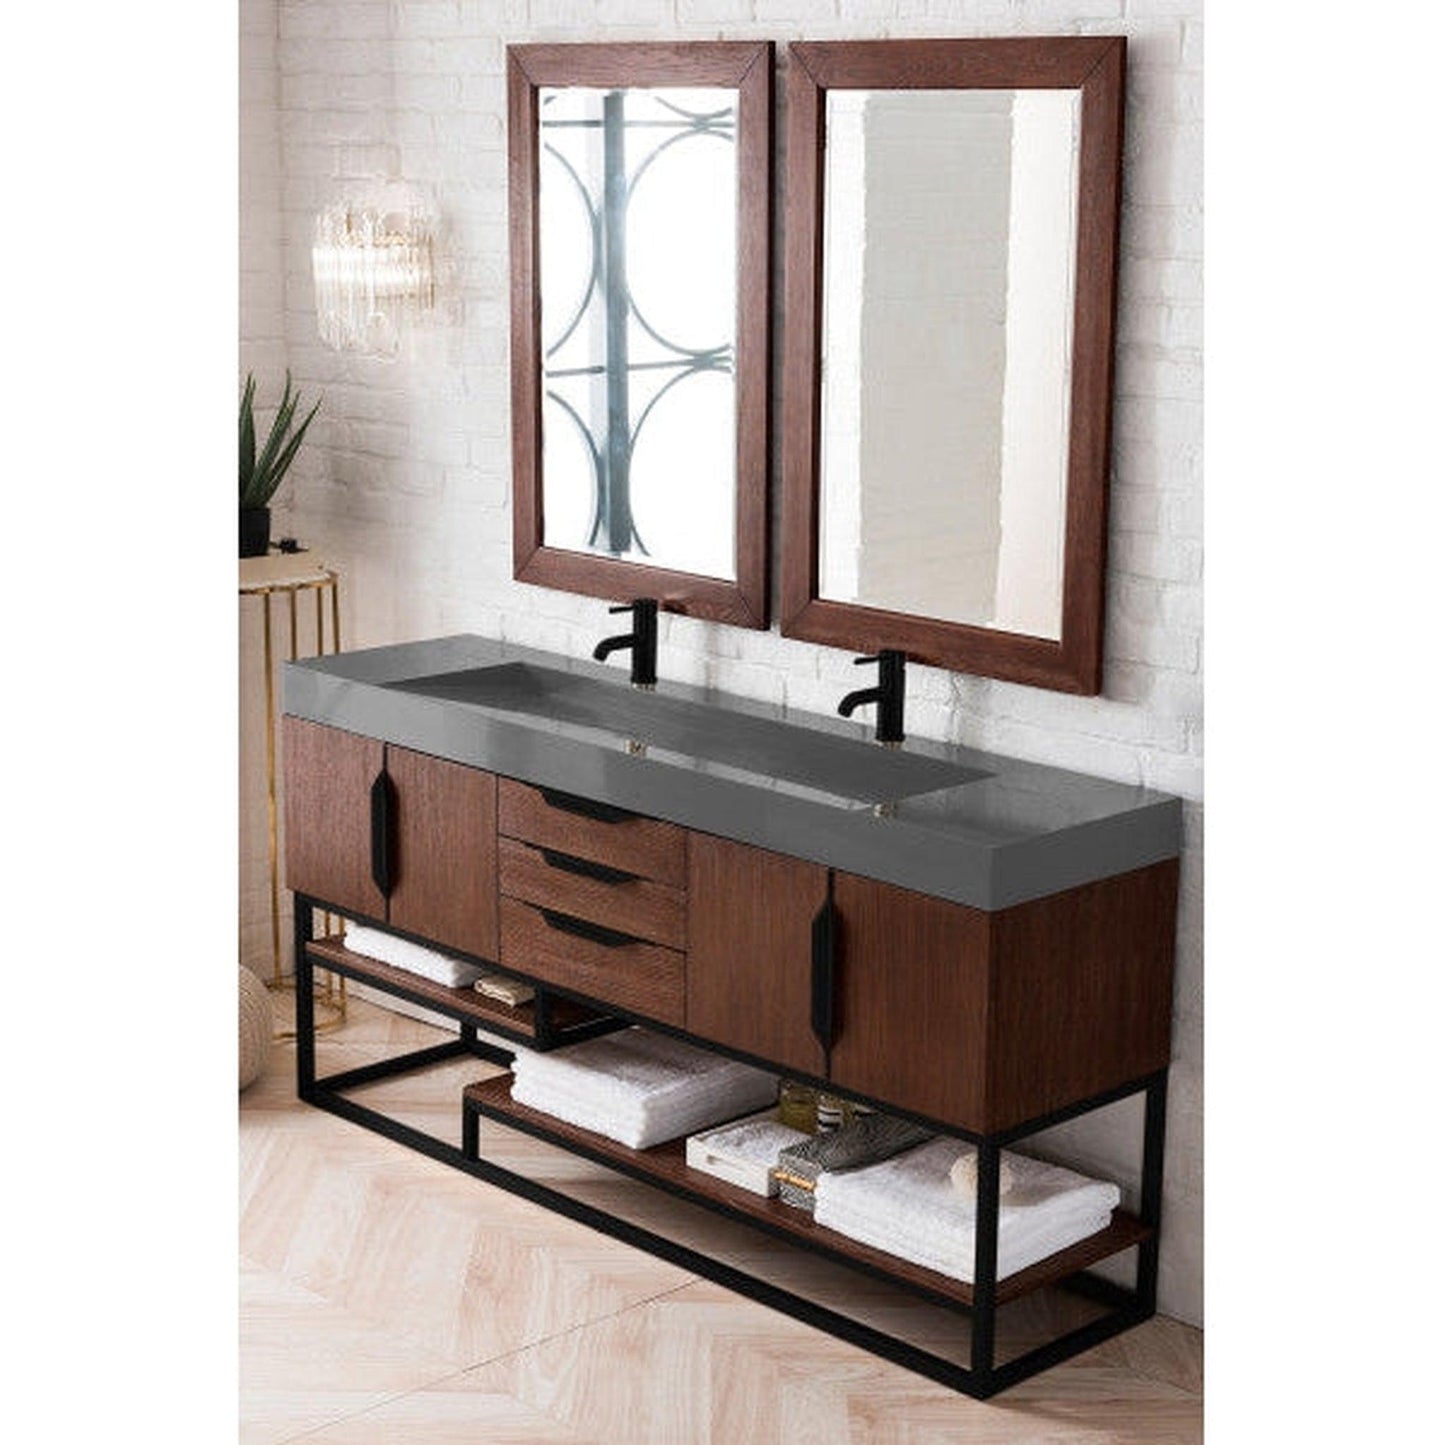 James Martin Columbia 73" Double Coffee Oak Bathroom Vanity With Matte Black Hardware and 6" Glossy Dusk Gray Composite Countertop